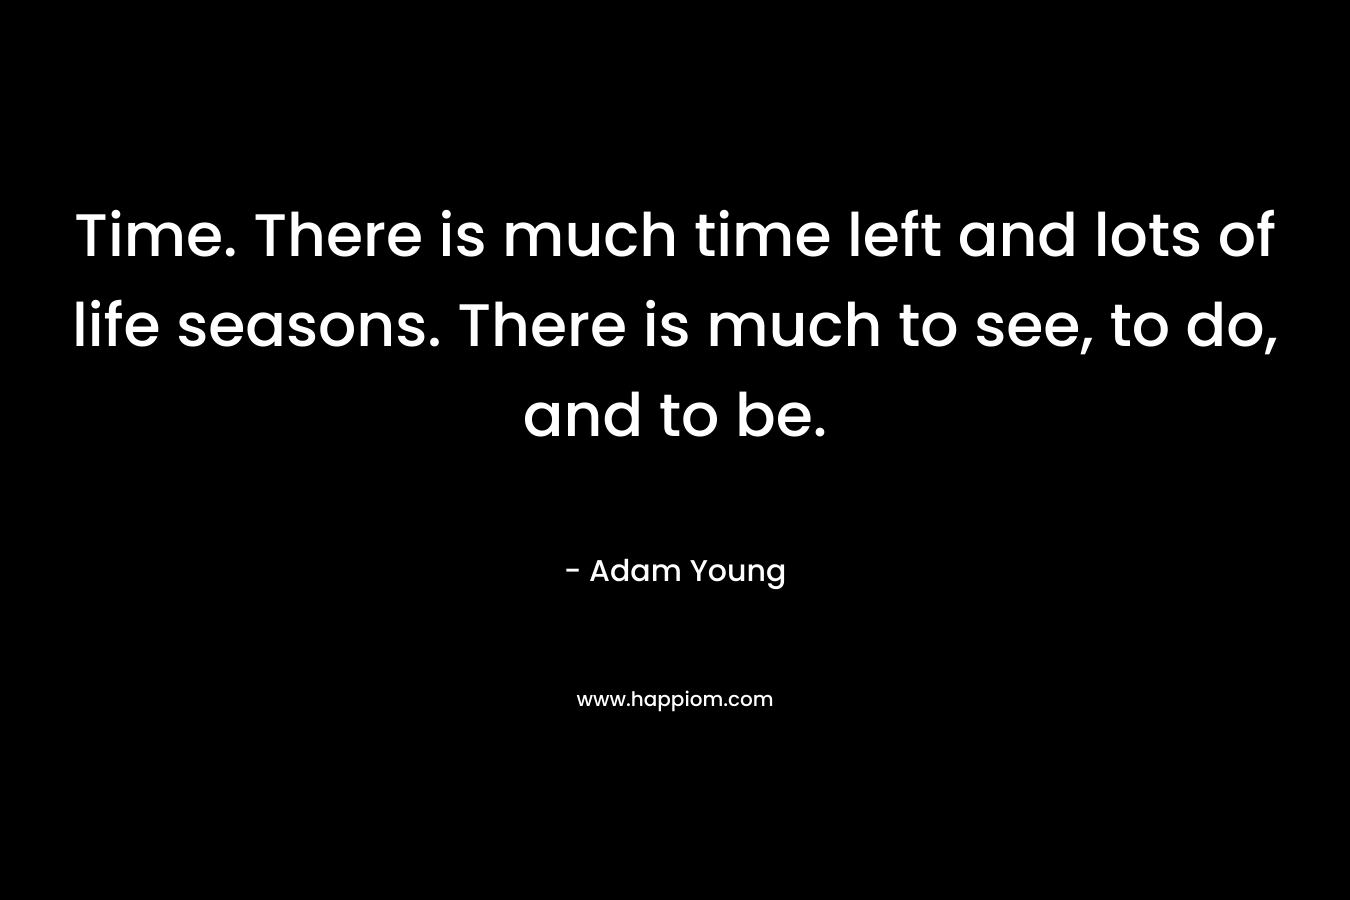 Time. There is much time left and lots of life seasons. There is much to see, to do, and to be. – Adam Young